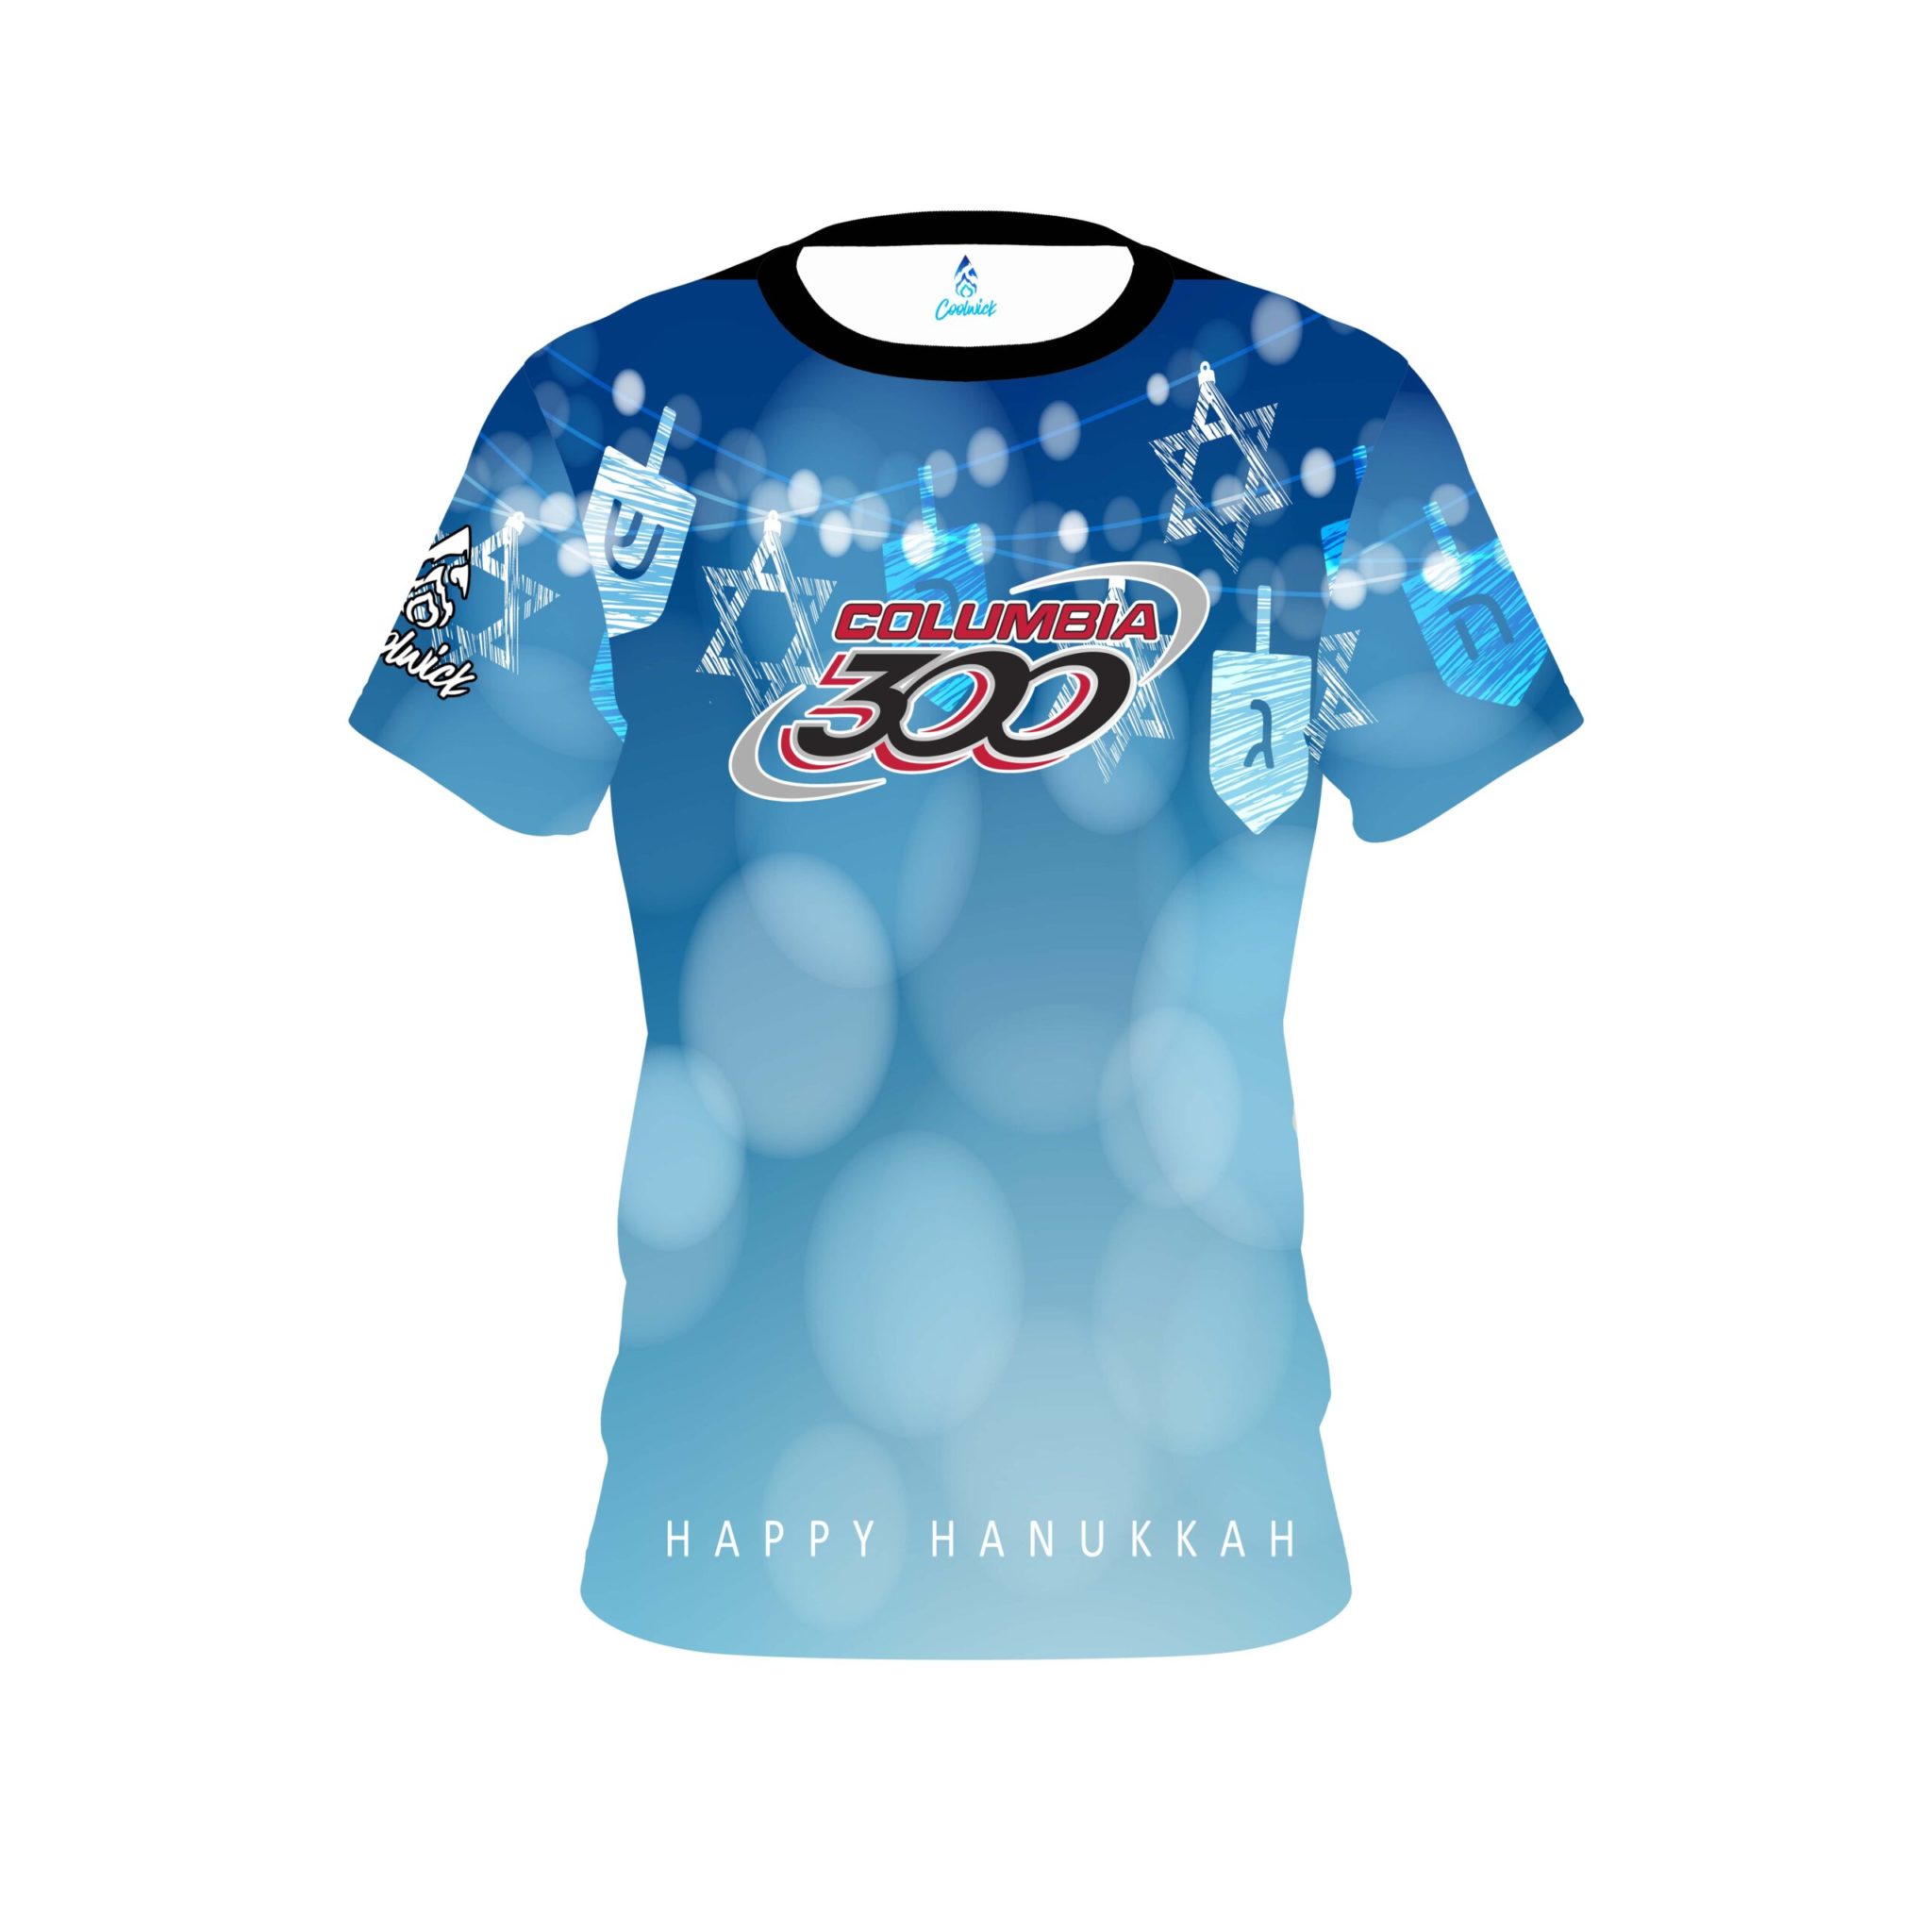 Columbia 300 Hanukkah Holiday Time Coolwick Bowling Jersey